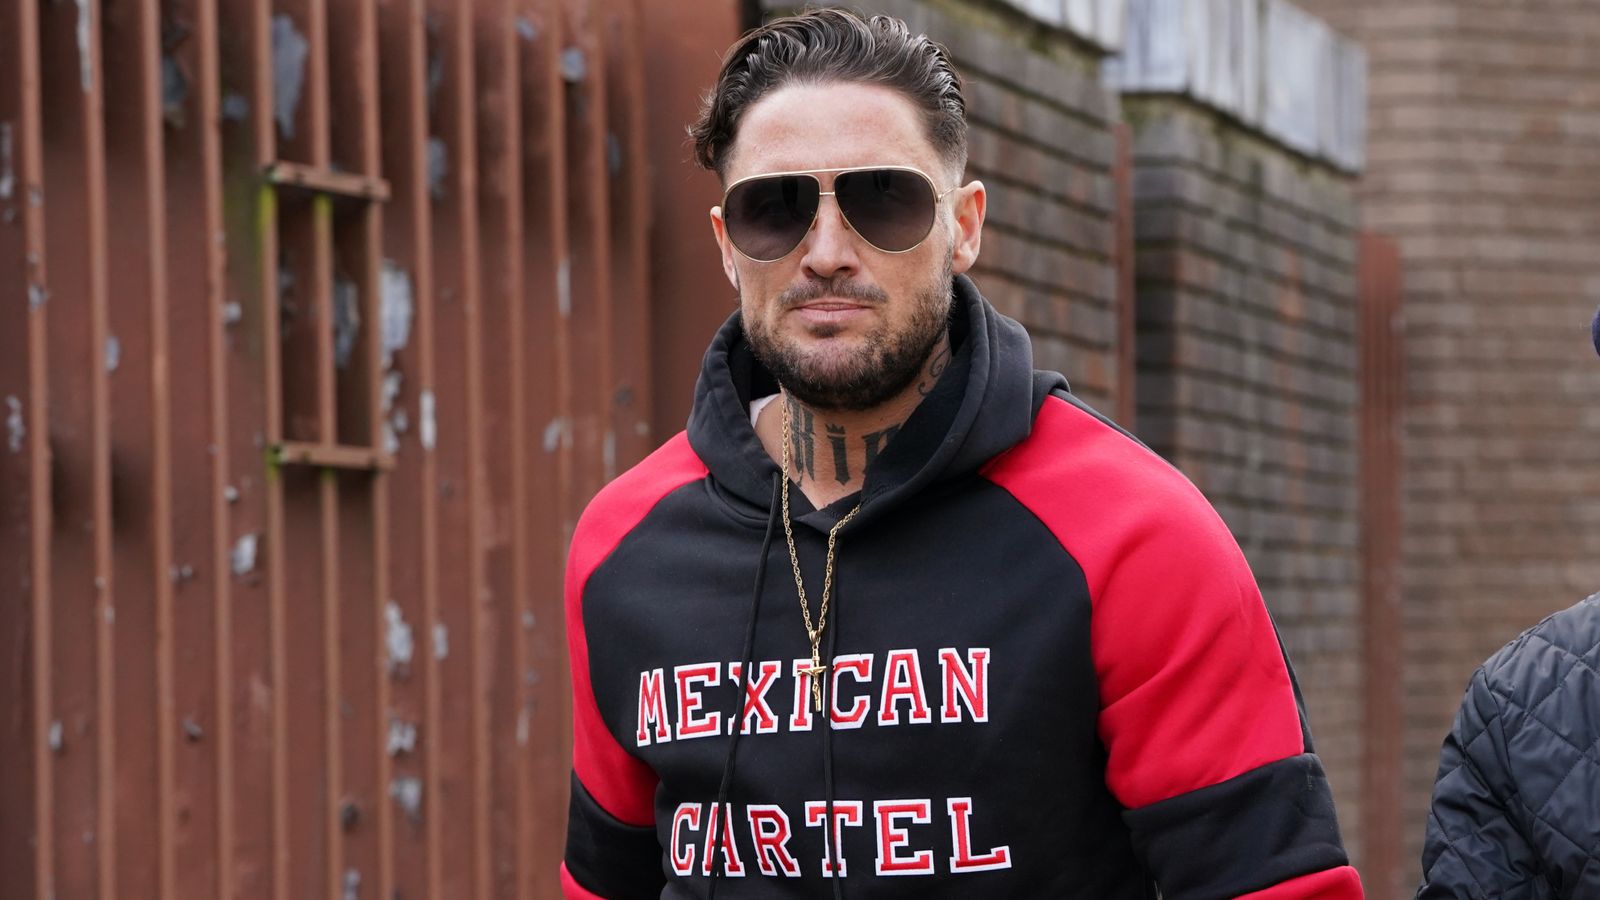 Stephen Bear and Georgia Harrison at court for hearing over profits he made from sharing private sex tape